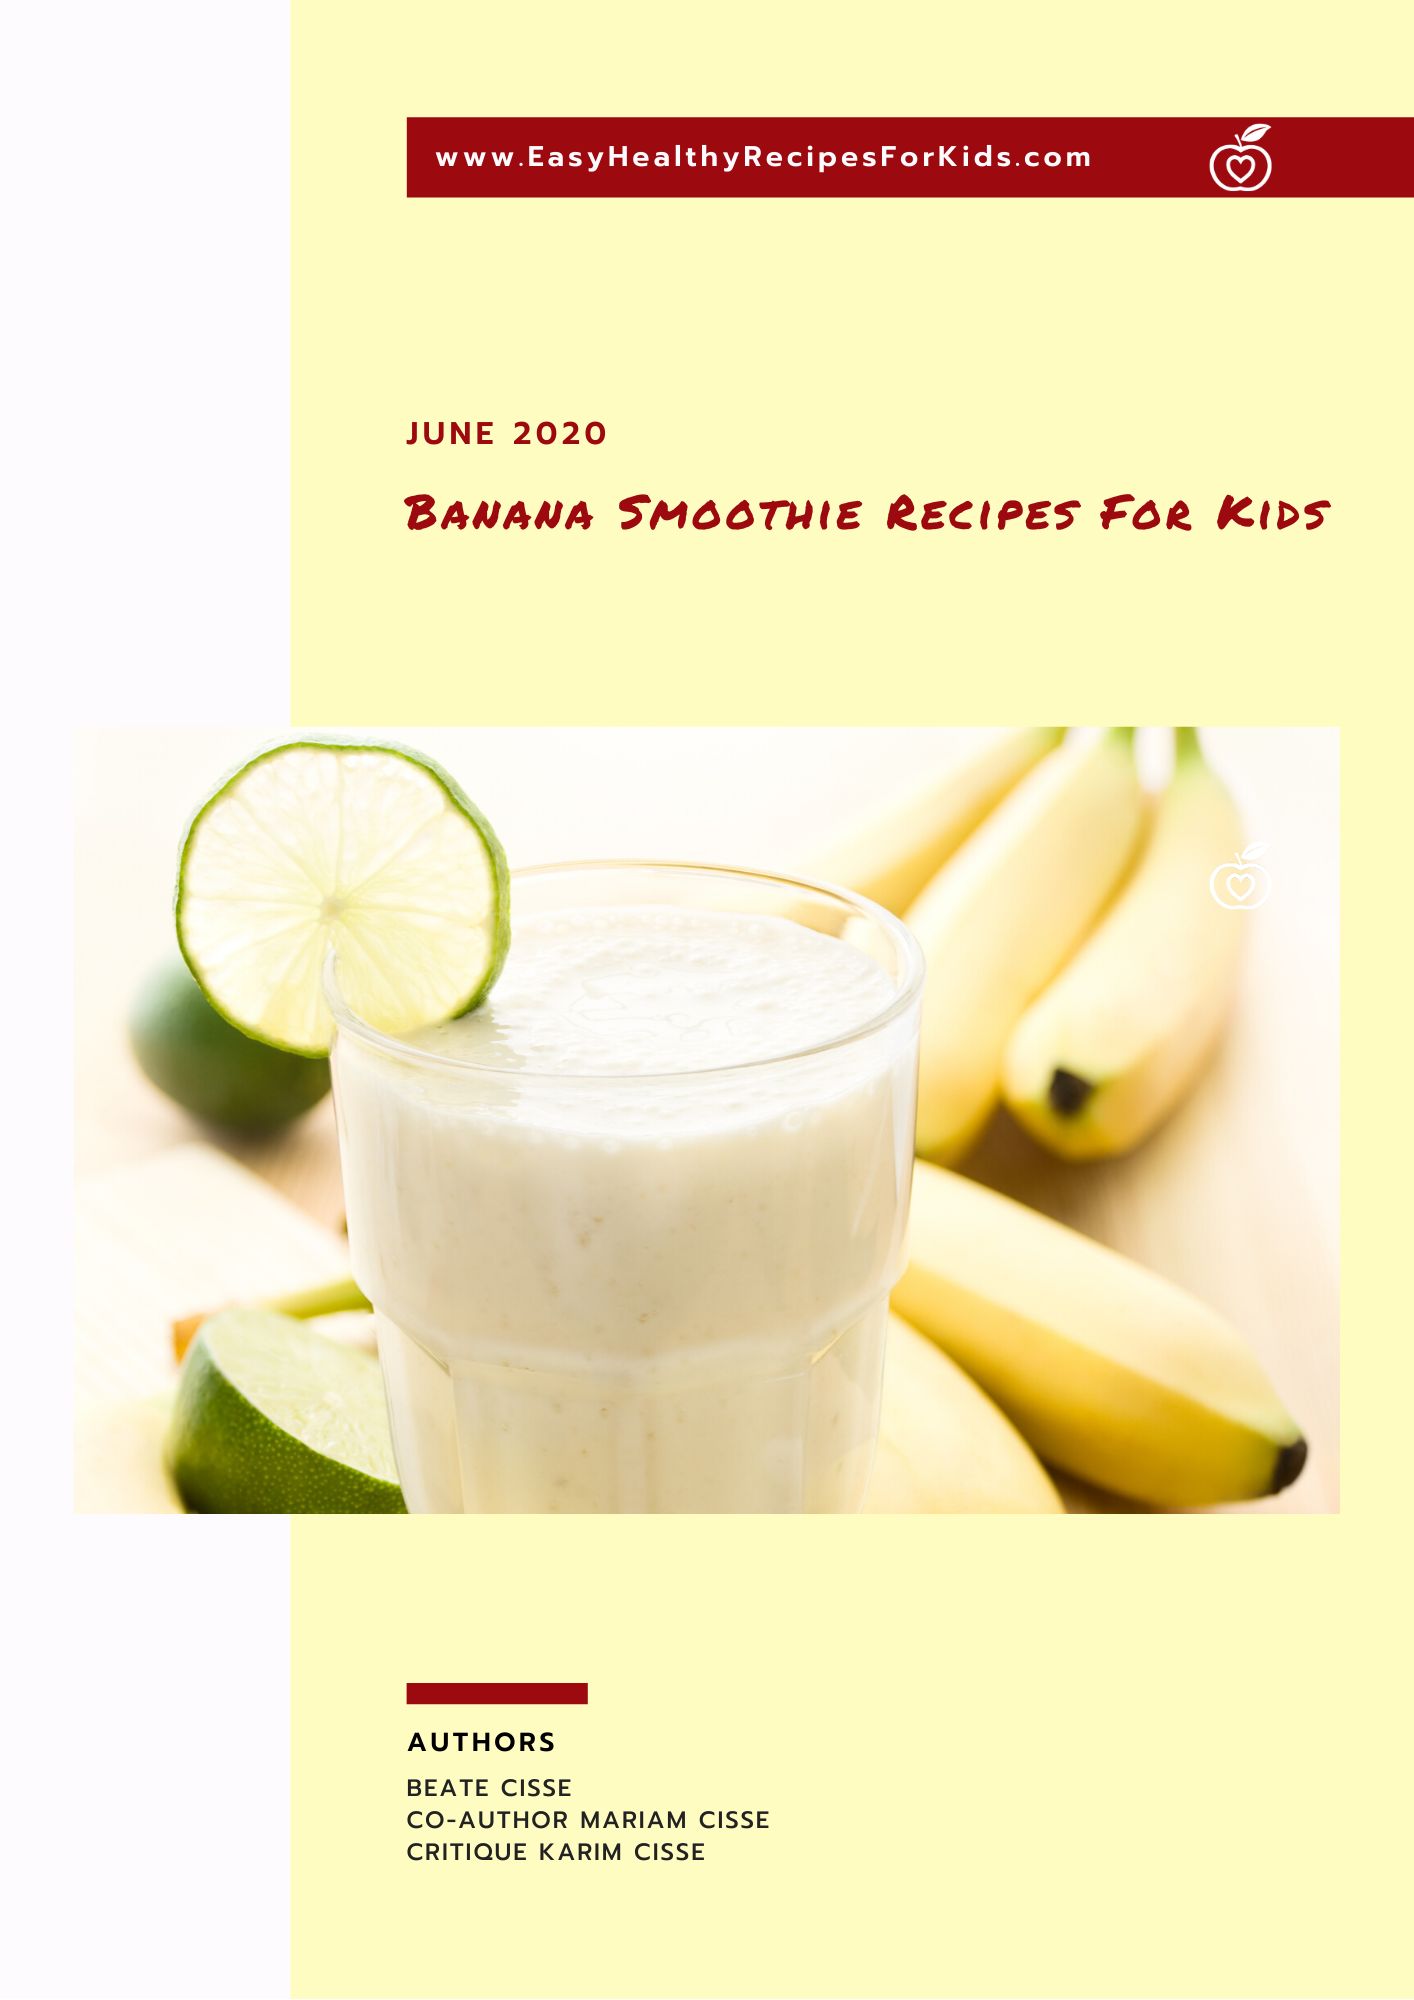 Banana Smoothies For Kids Booklet Cover